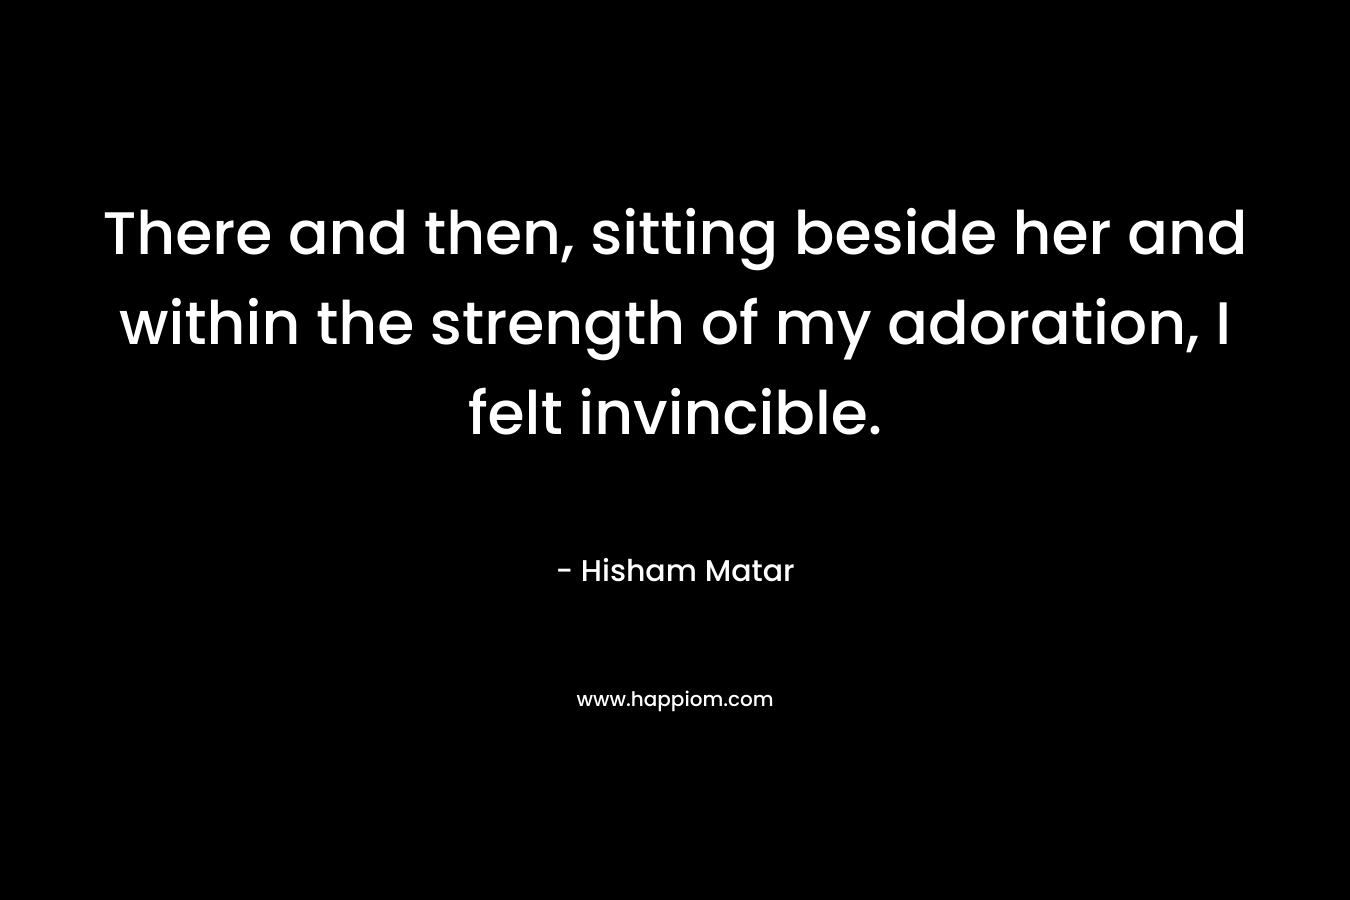 There and then, sitting beside her and within the strength of my adoration, I felt invincible.